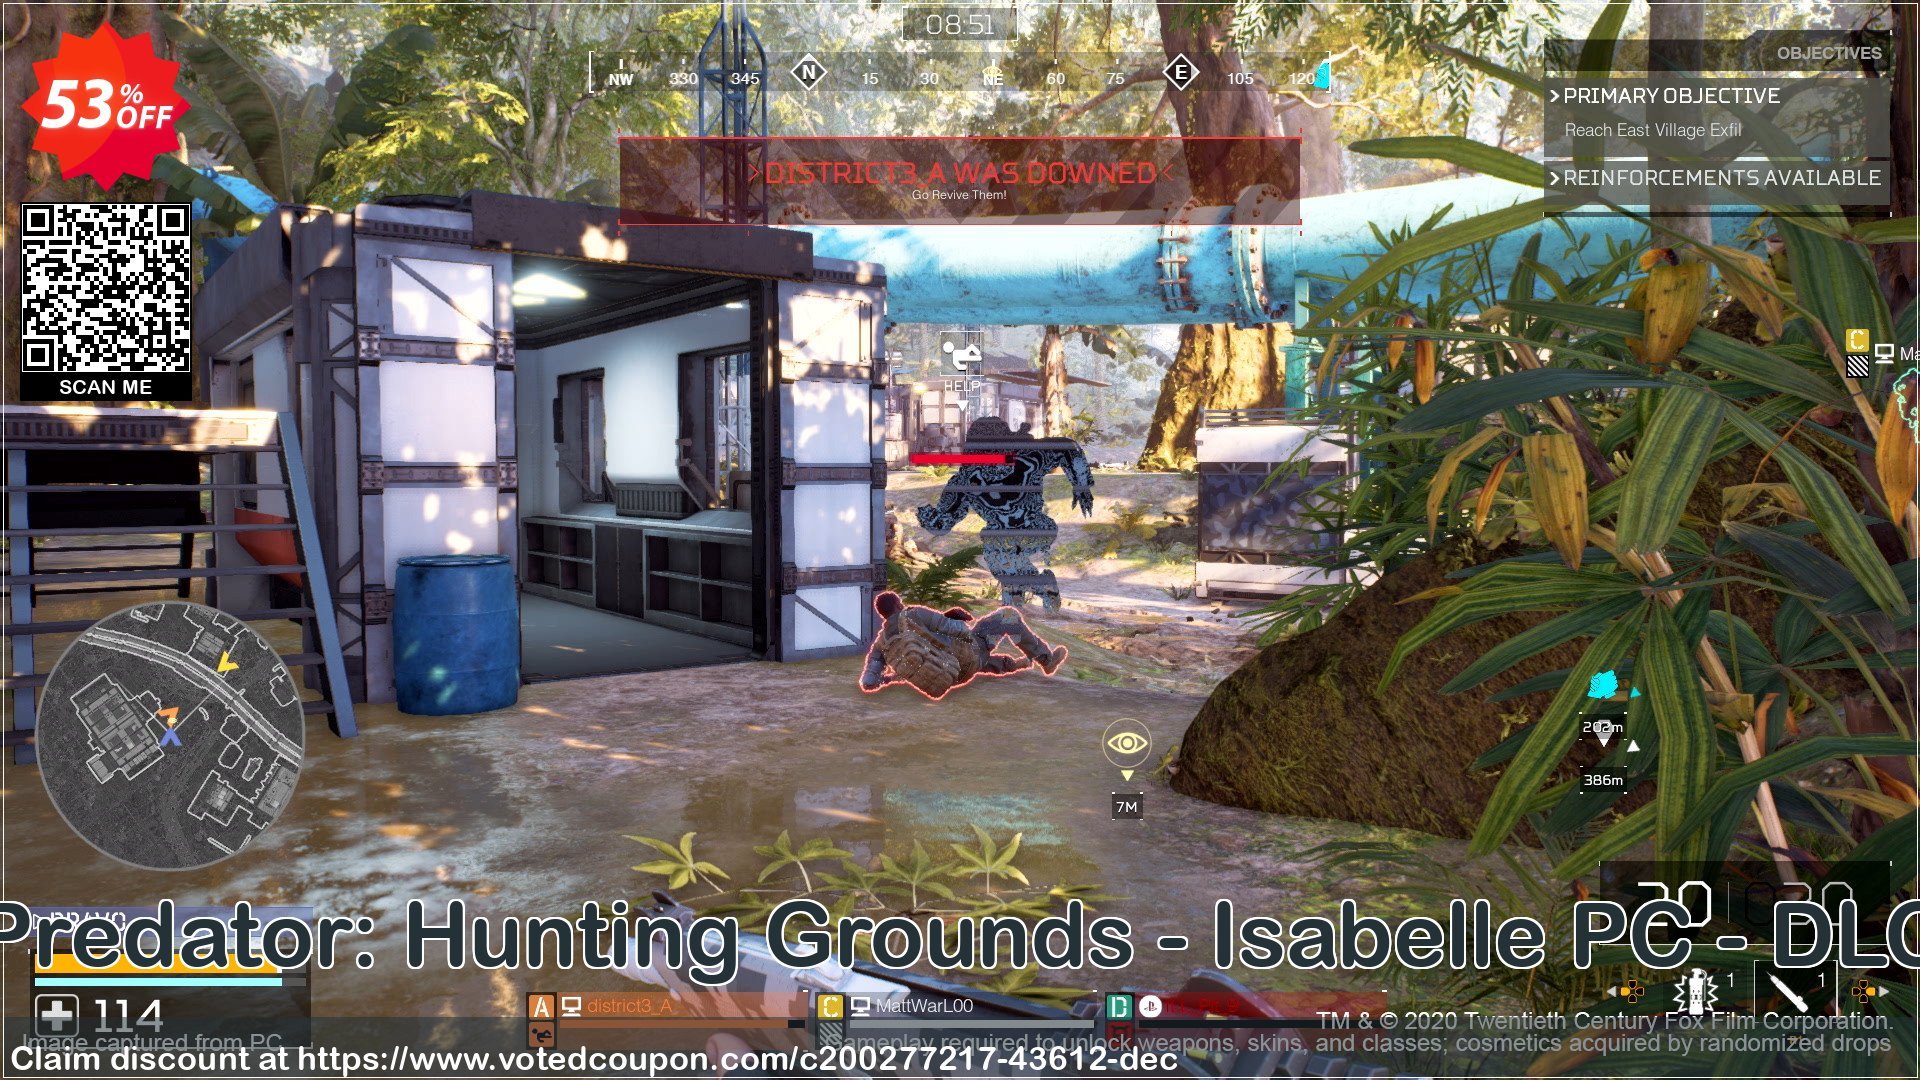 Predator: Hunting Grounds - Isabelle PC - DLC Coupon Code May 2024, 53% OFF - VotedCoupon